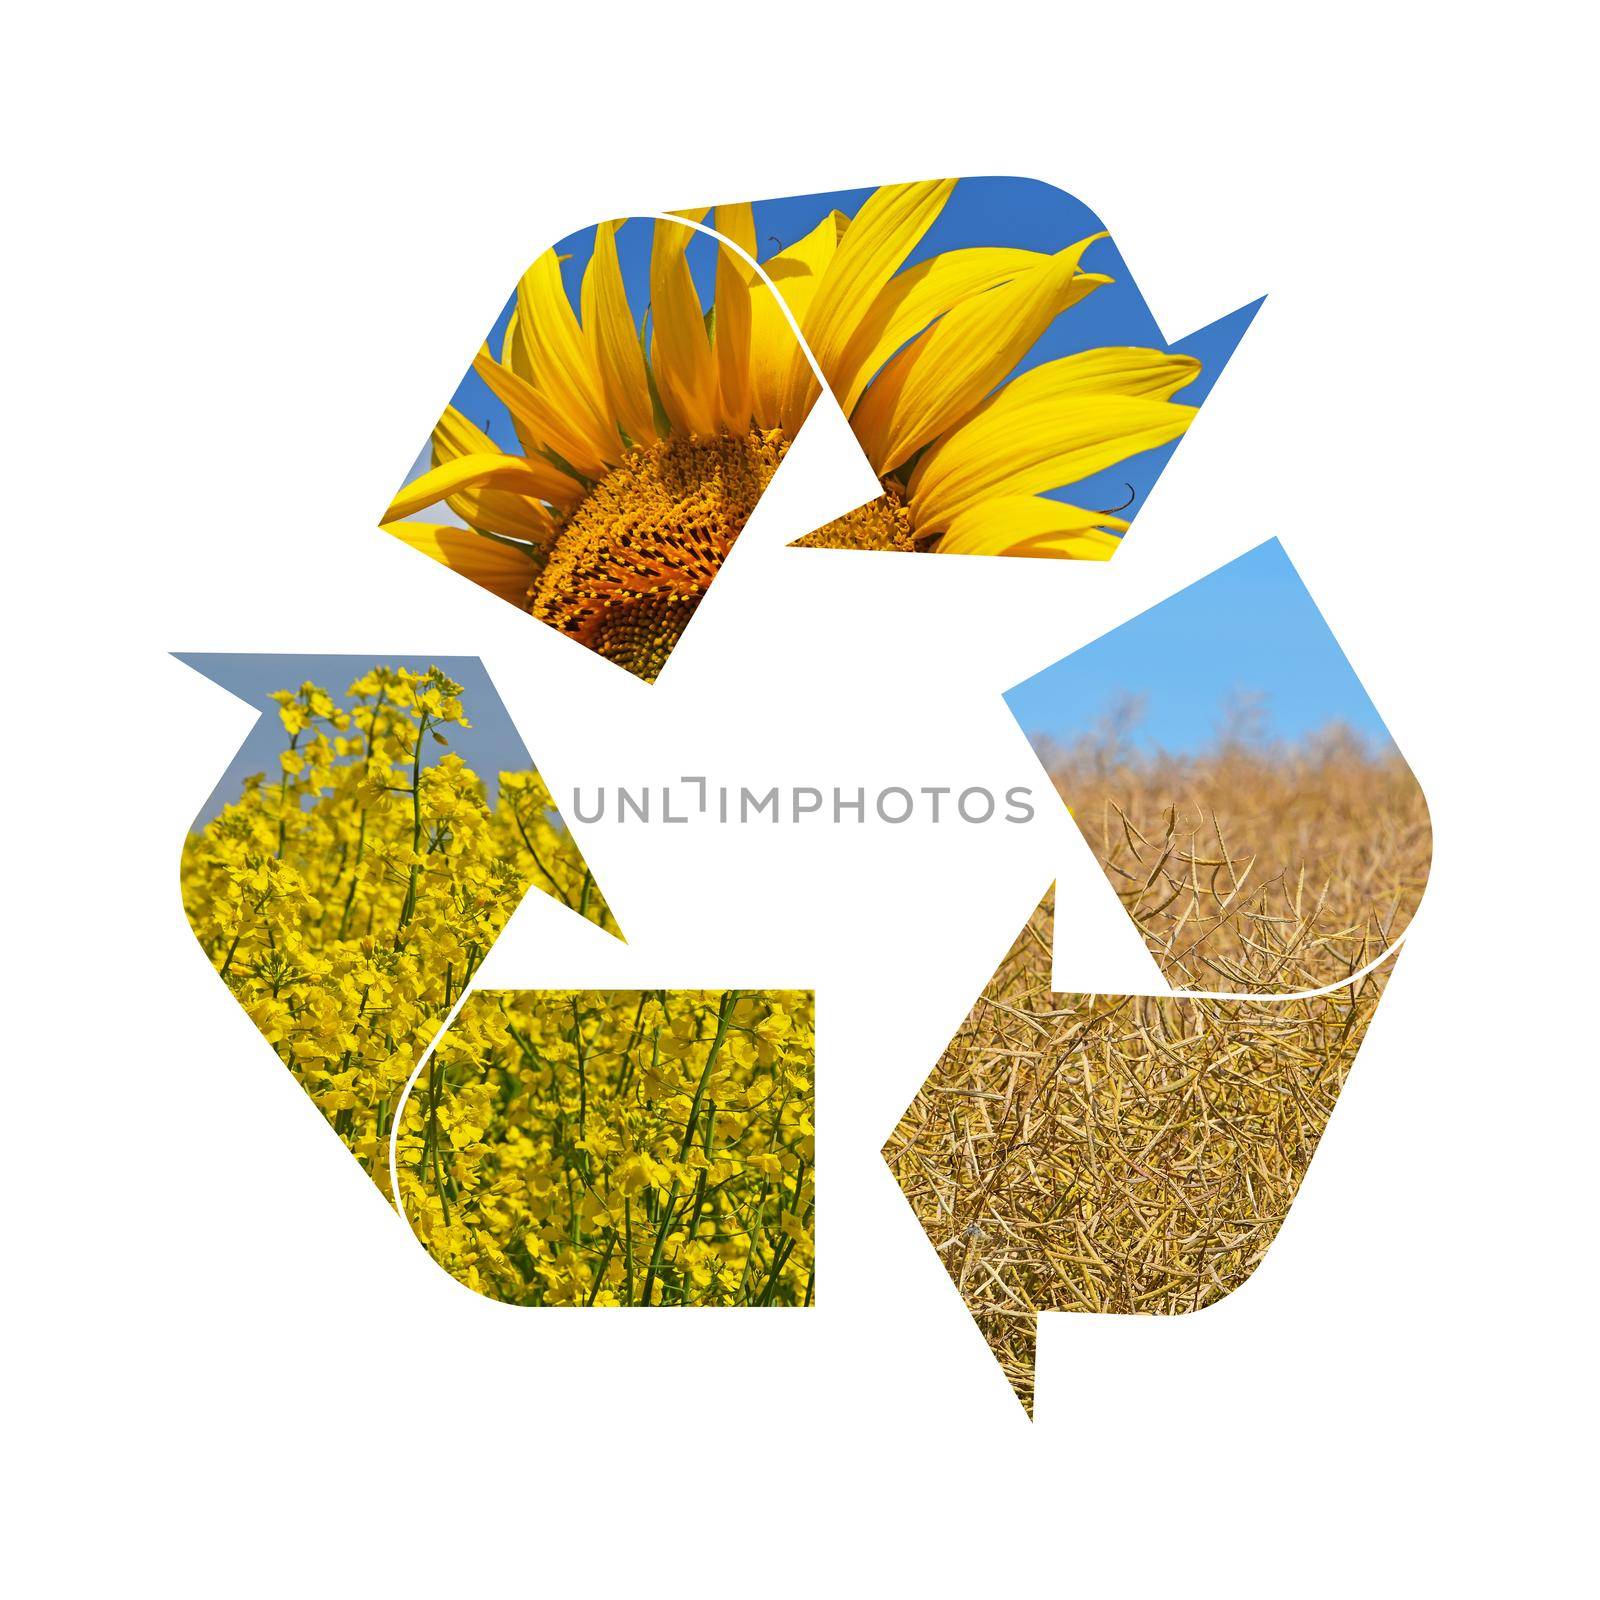 Illustration recycling symbol of agriculture by BreakingTheWalls